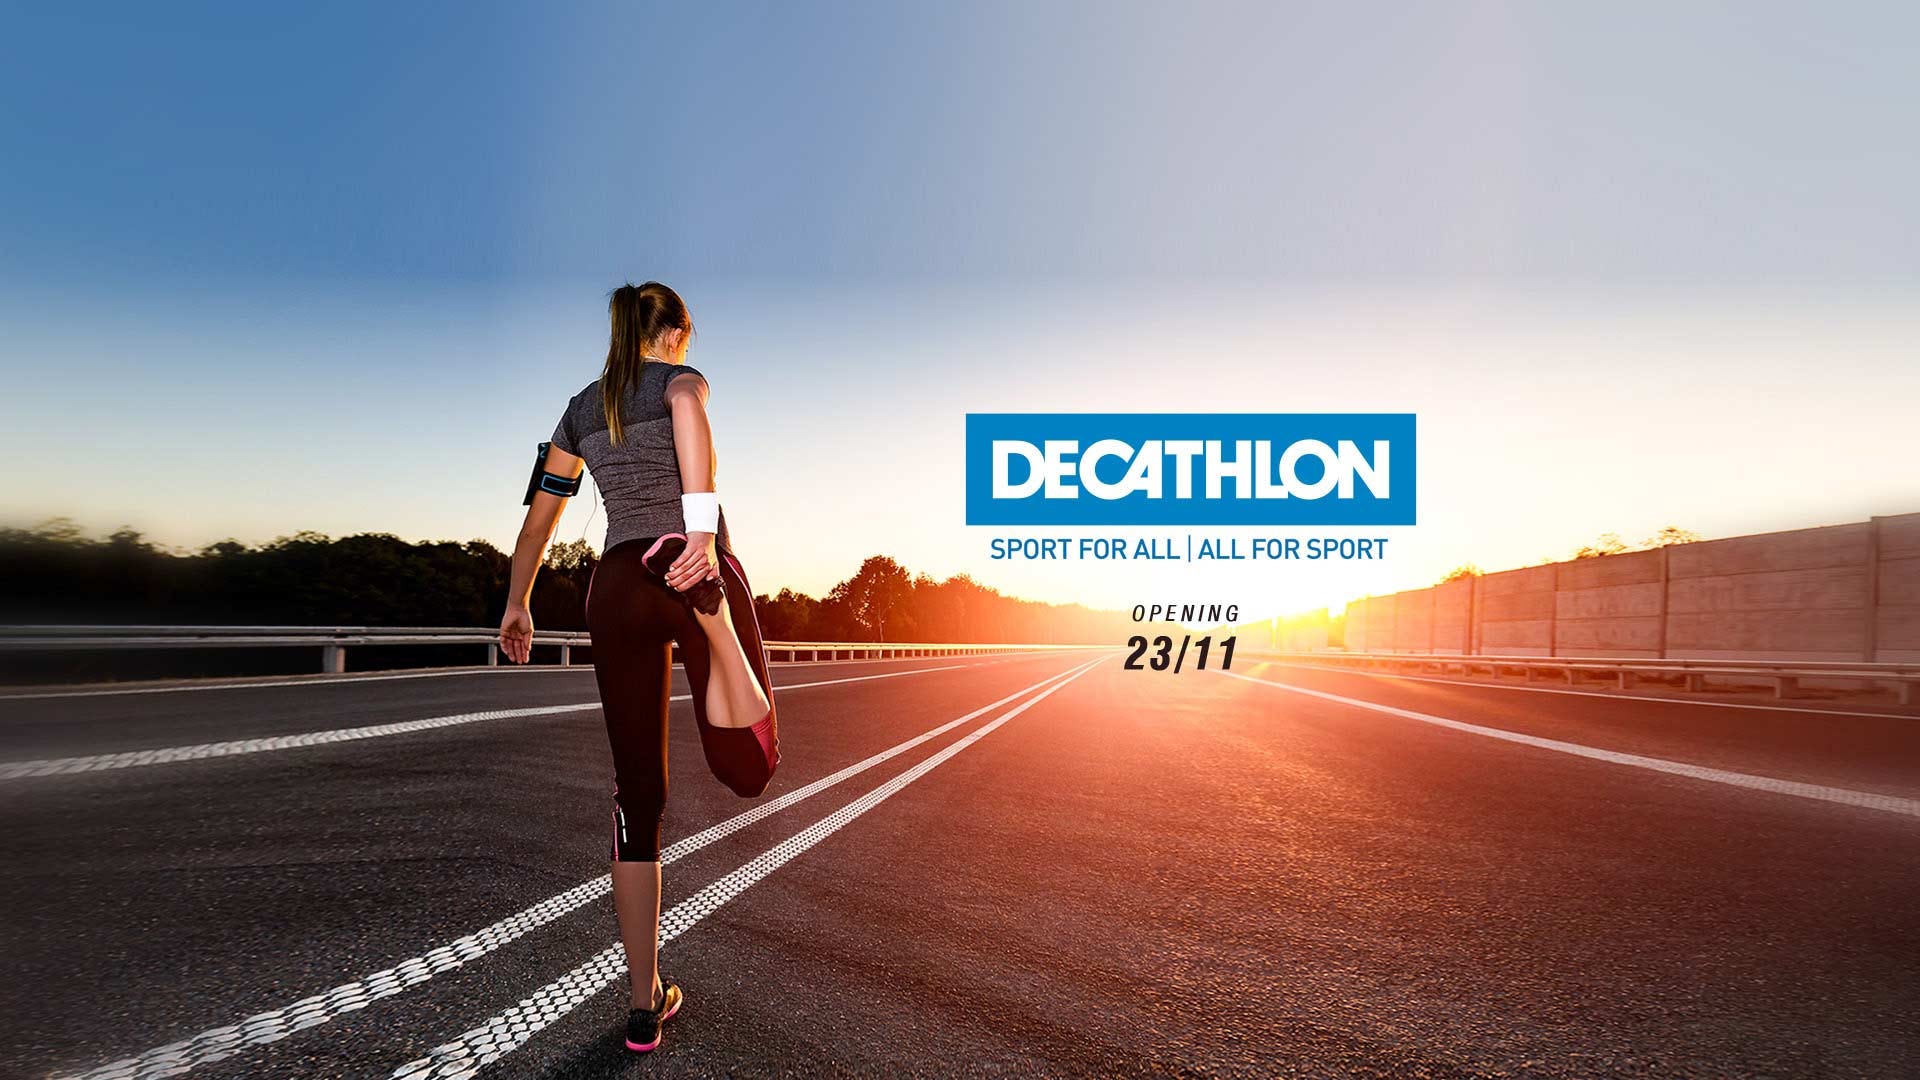 Affordable Sporting Gear Since 1976 - Our Story - Decathlon